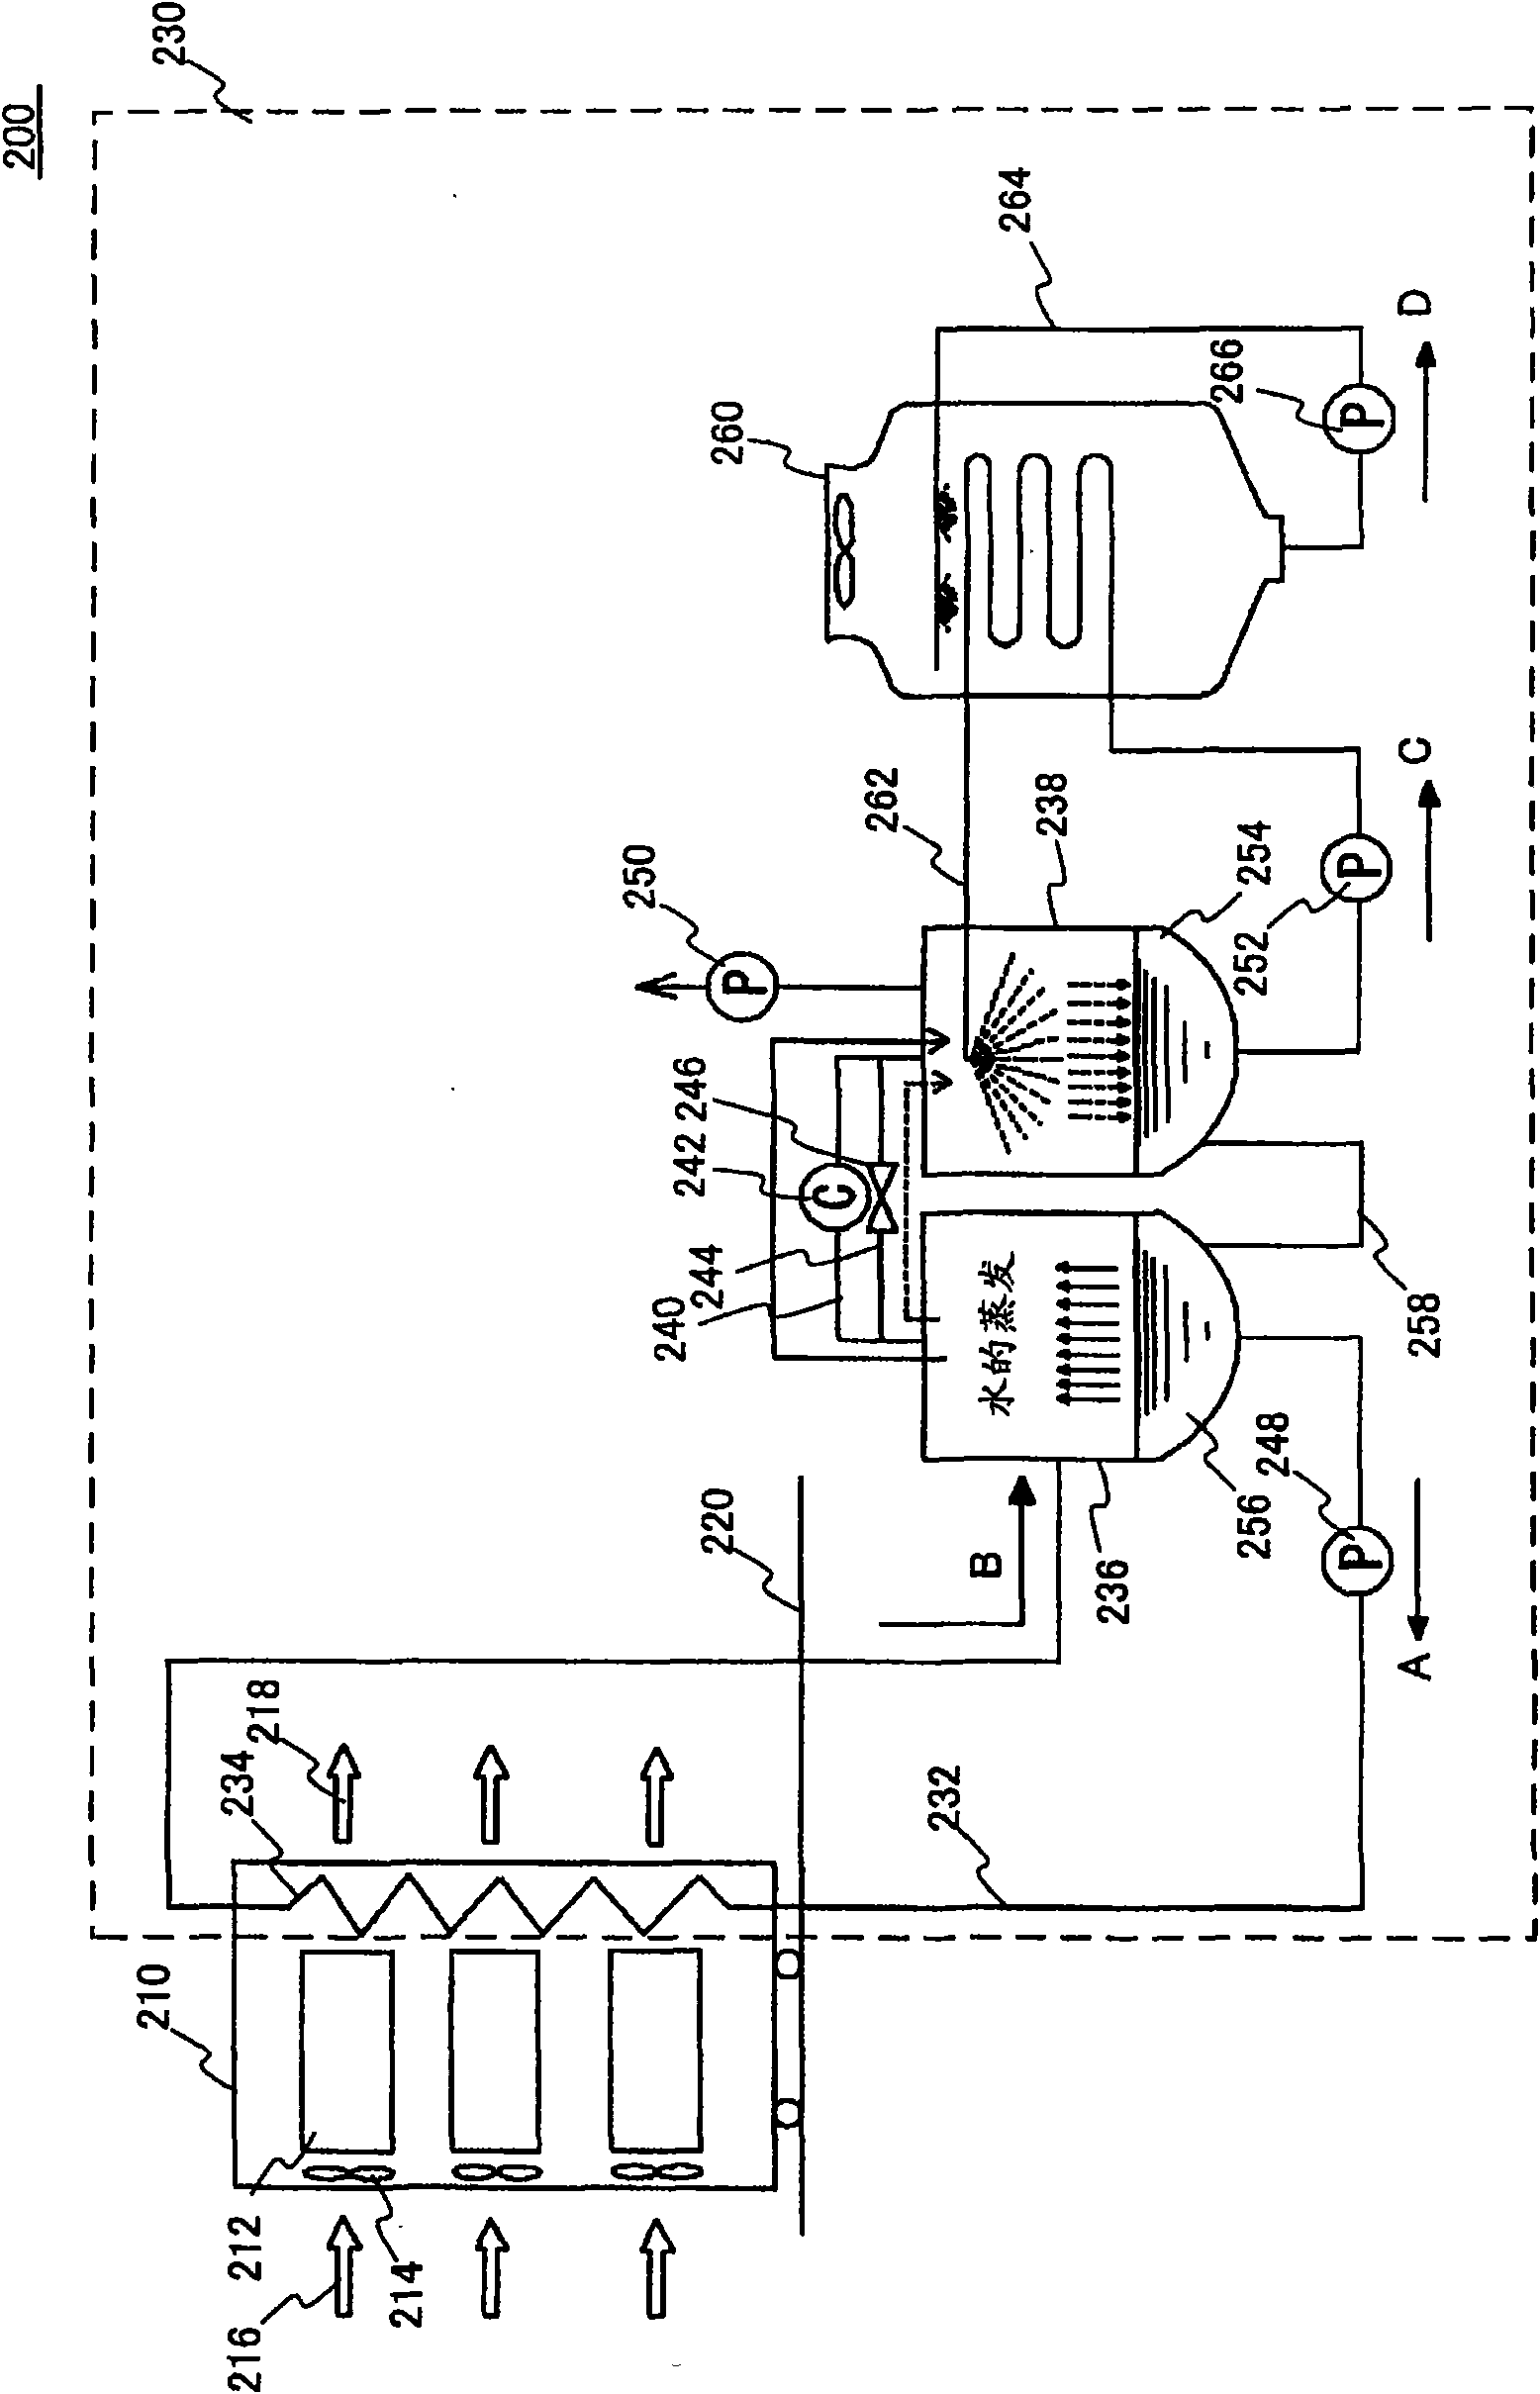 Device and method for promotion of cooling electronic device rack by using a vapor compression system